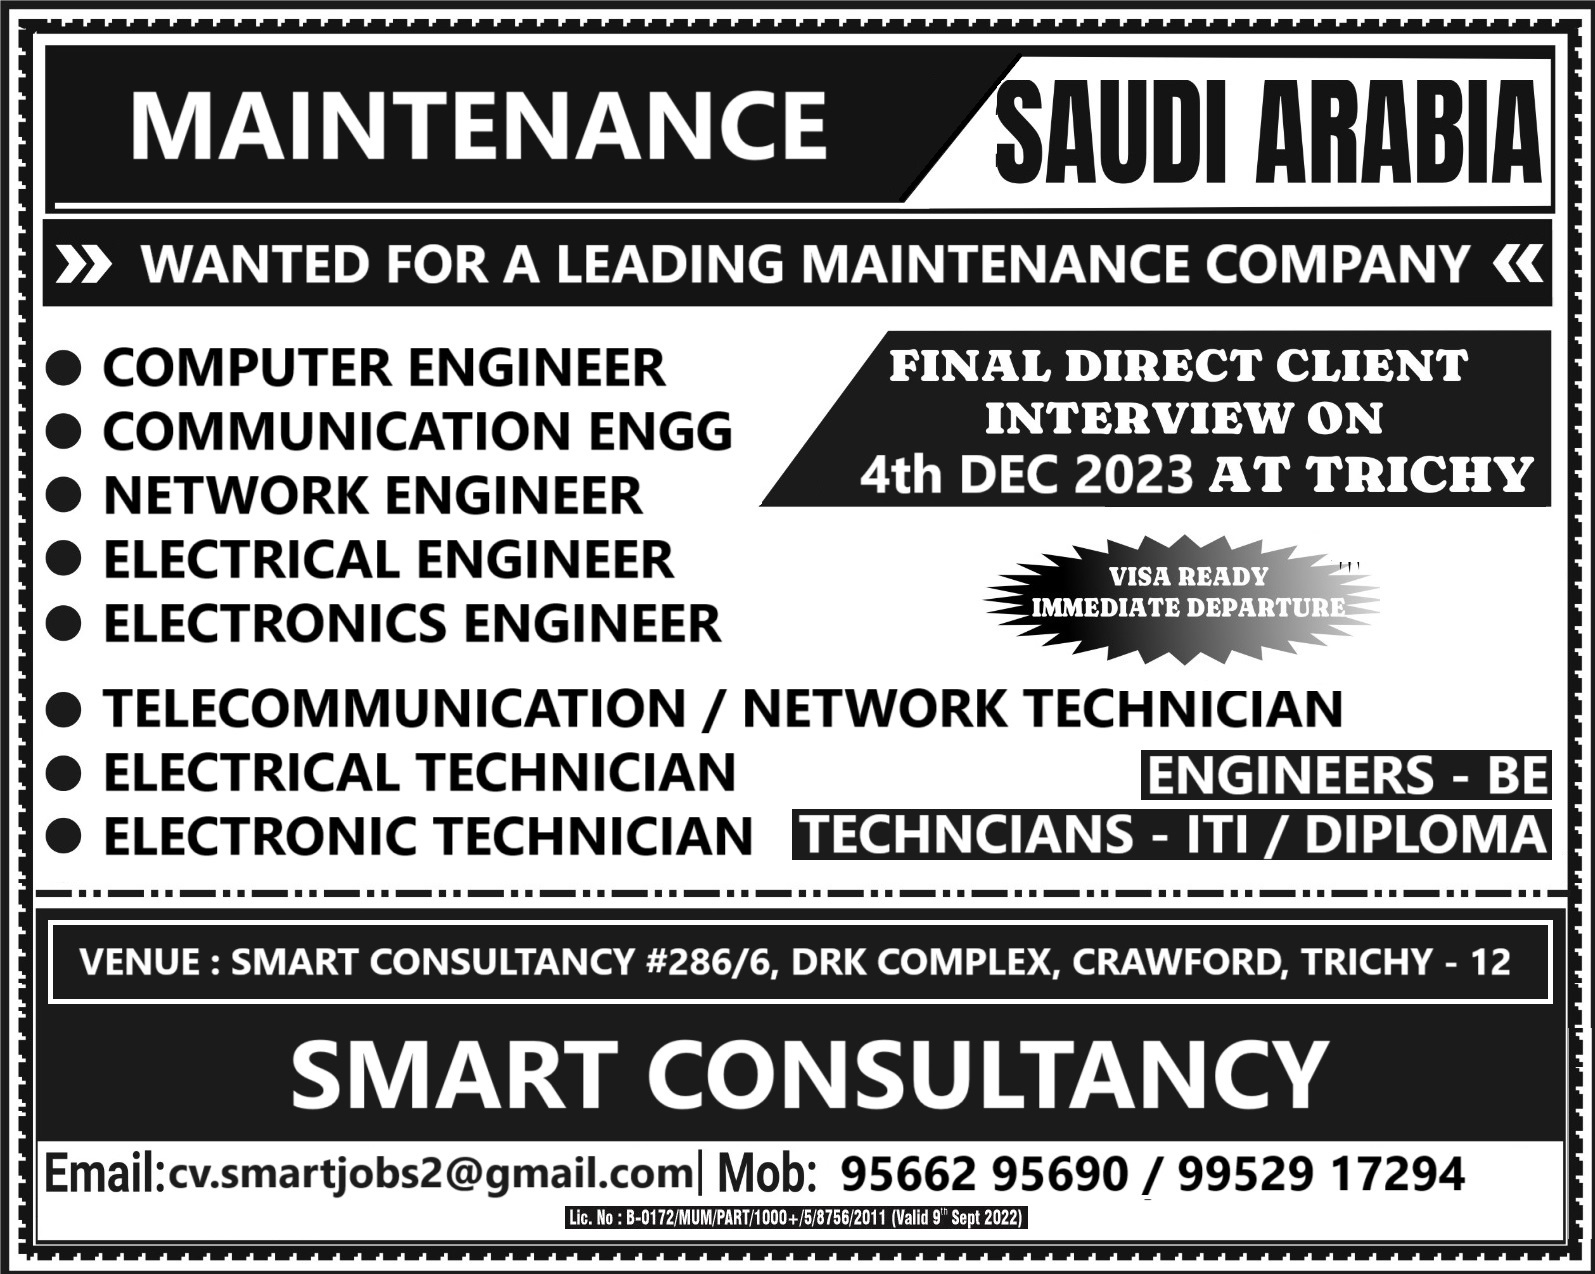 WANTED FOR A LEADING COMPANY - SAUDI ARABIA / DIRECT CLIENT INTERVIEW ON 4 DEC - TRICHY